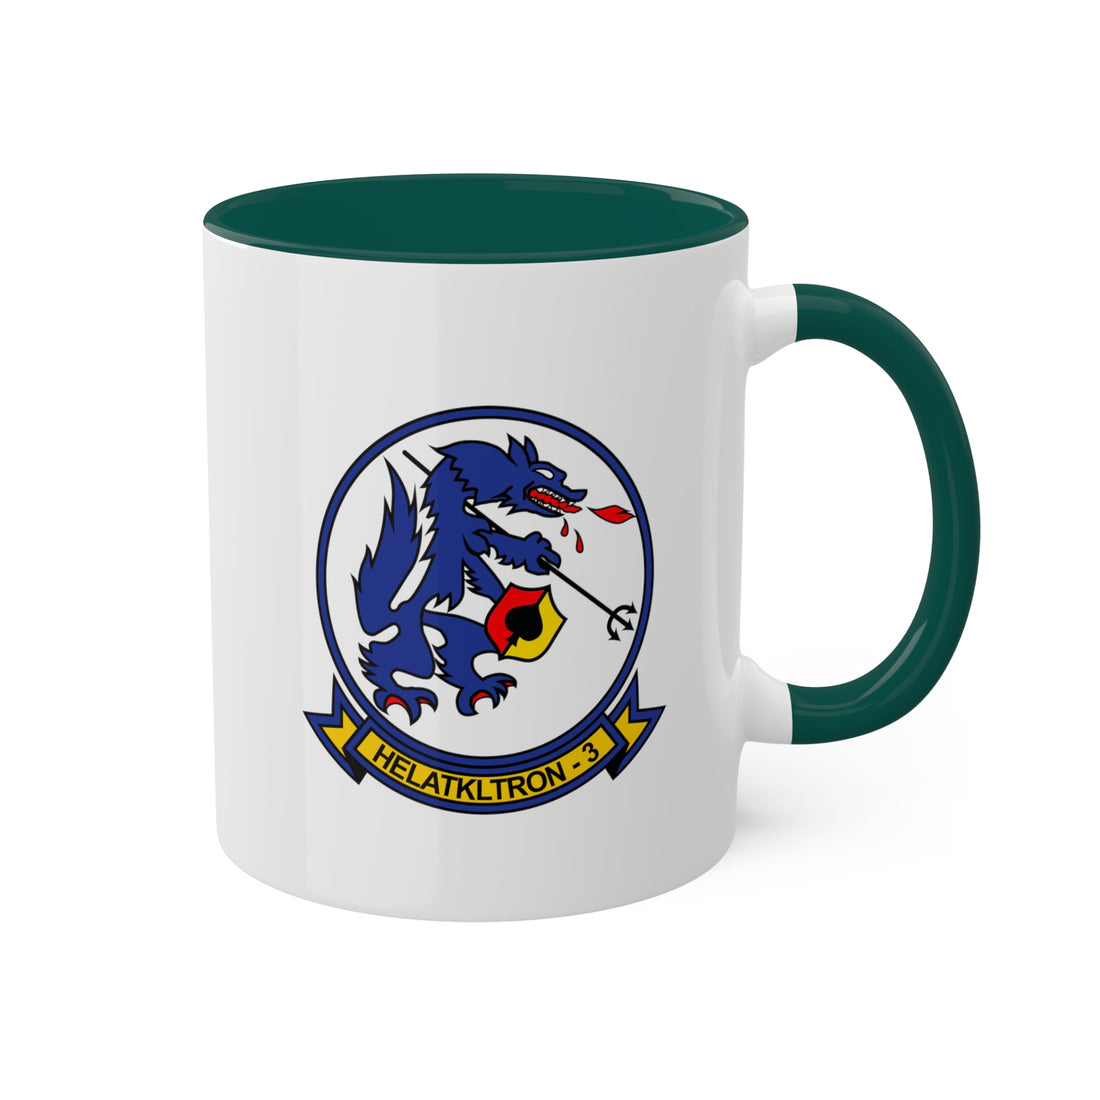 HA(L)-3 "Seawolves" Combat Aircrewman 10oz. Mug, Navy Helicopter Attack Squadron flying the H-1 - Shop at Hippy's Goodness